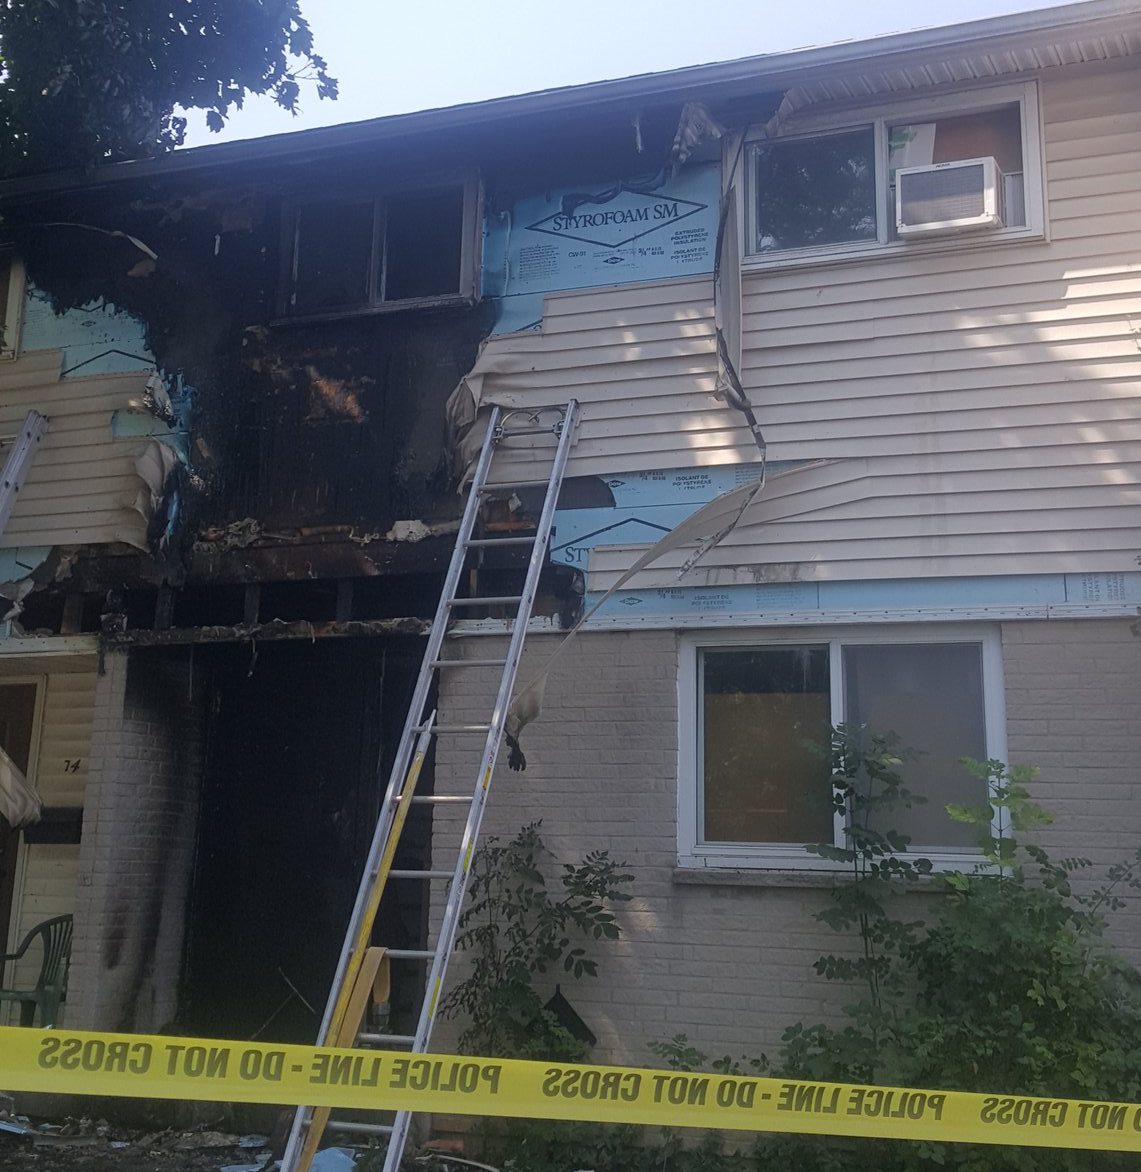 Ontario's Office of the Fire Marshal is investigating after two fires broke out in the same townhouse complex on Tuesday morning.